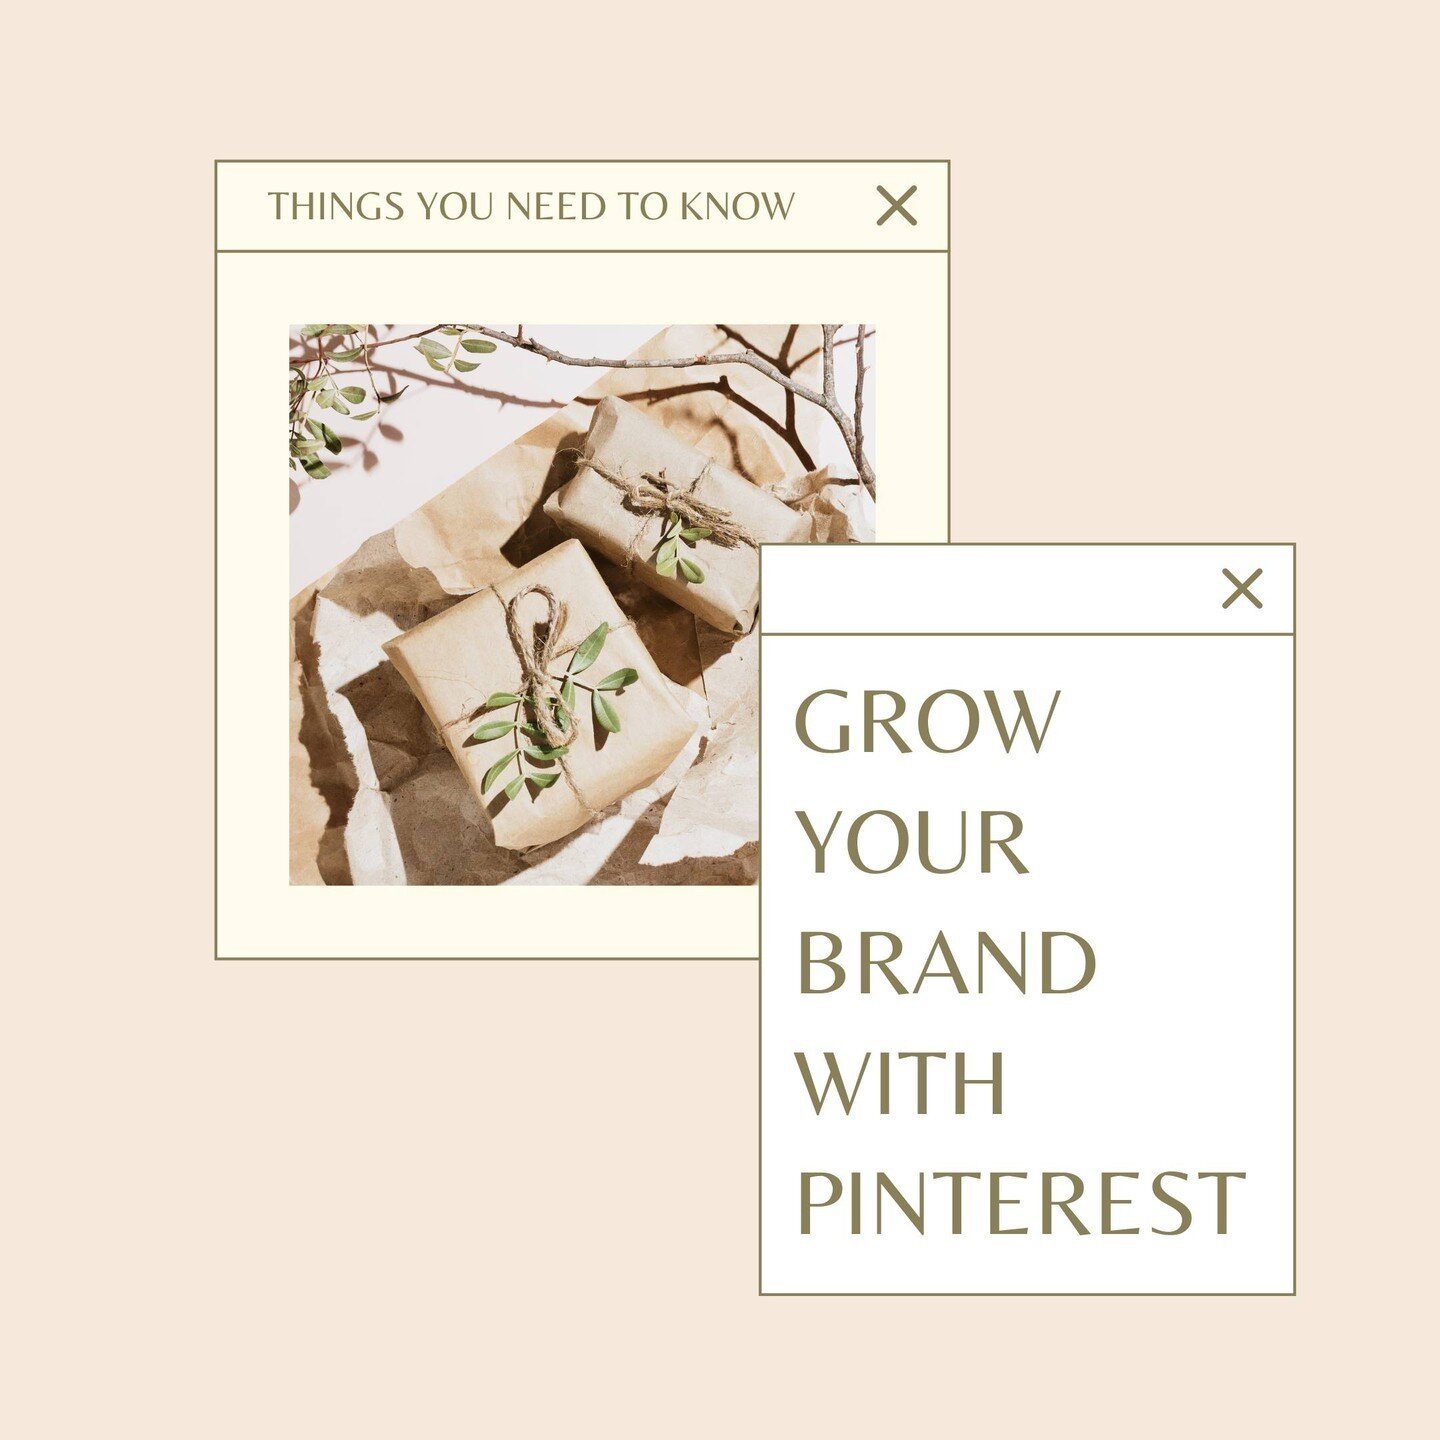 If you're not using Pinterest to grow your brand, now's the time to start.⁠
⁠
The wonderful thing about Pinterest is: as a search engine, it does not rely on follower count, but relies on keywords. ⁠
⁠
This is important because if you want to get fou